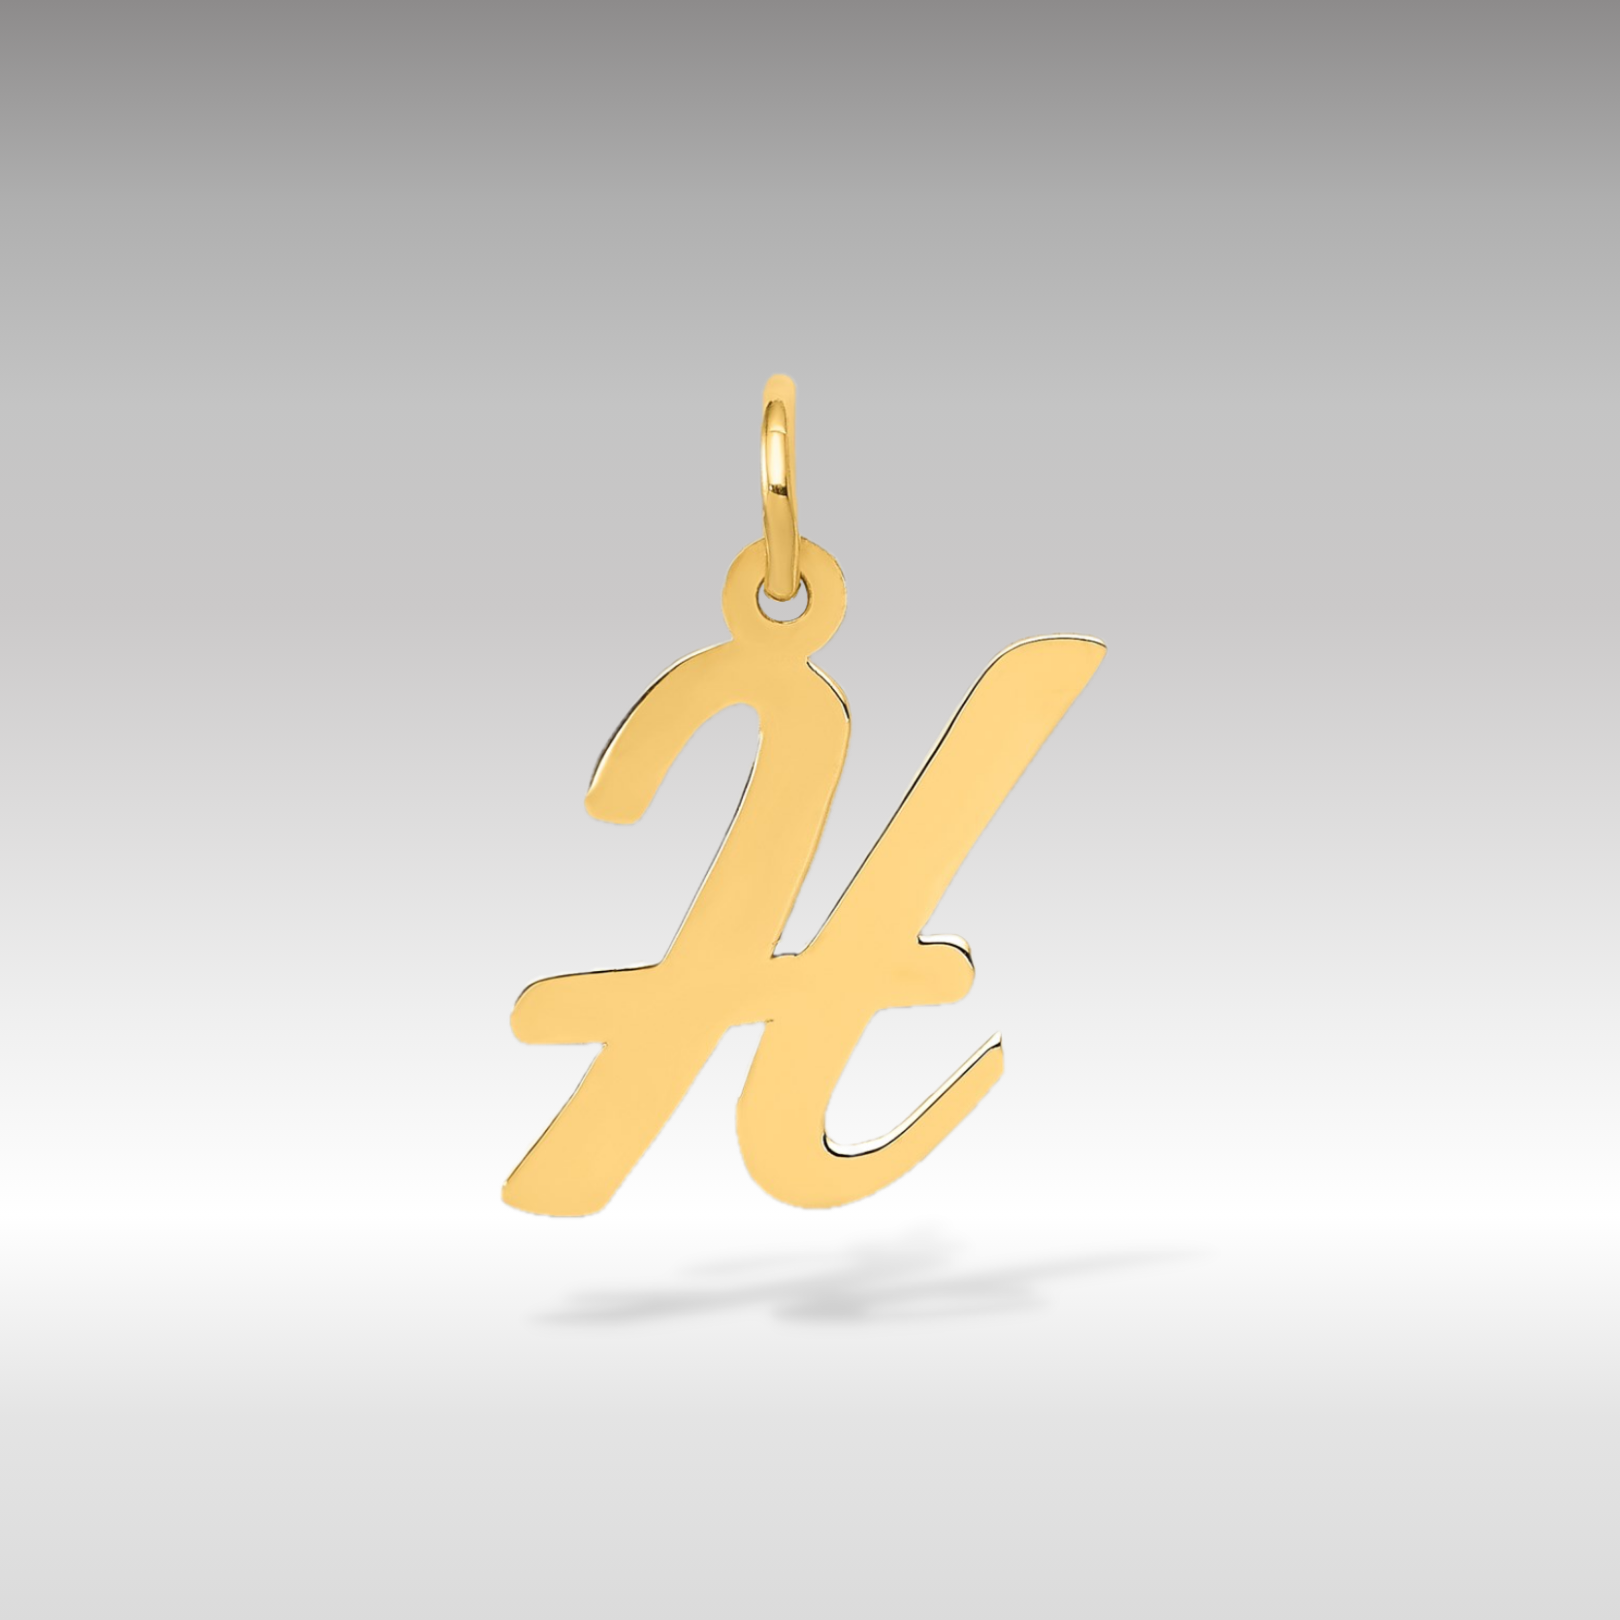 14K Gold Script Letter "H" Initial Pendant - Charlie & Co. Jewelry